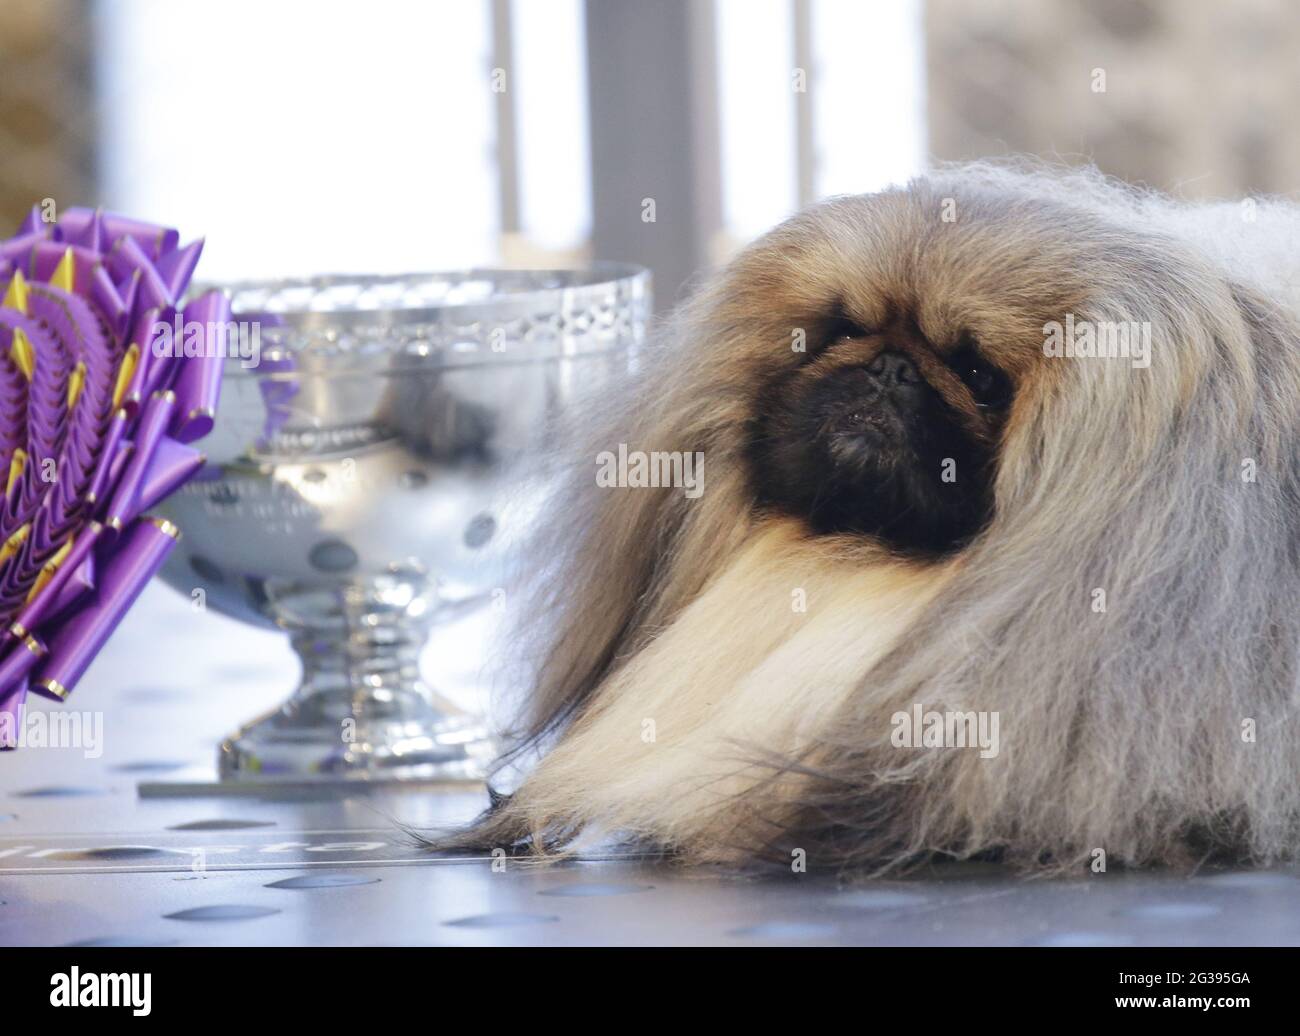 New York, United States. 14th June, 2021. Wasabi the Pekingese visits the Empire State Building after winning Best In Show the day before at the 145th annual Westminster Kennel Club Dog Show in New York City on Monday, June 14, 2021. This years Westminster Dog Show was delayed due to COVID-19 and next years competition will return again to Madison Square Garden. Photo by John Angelillo/UPI Credit: UPI/Alamy Live News Stock Photo